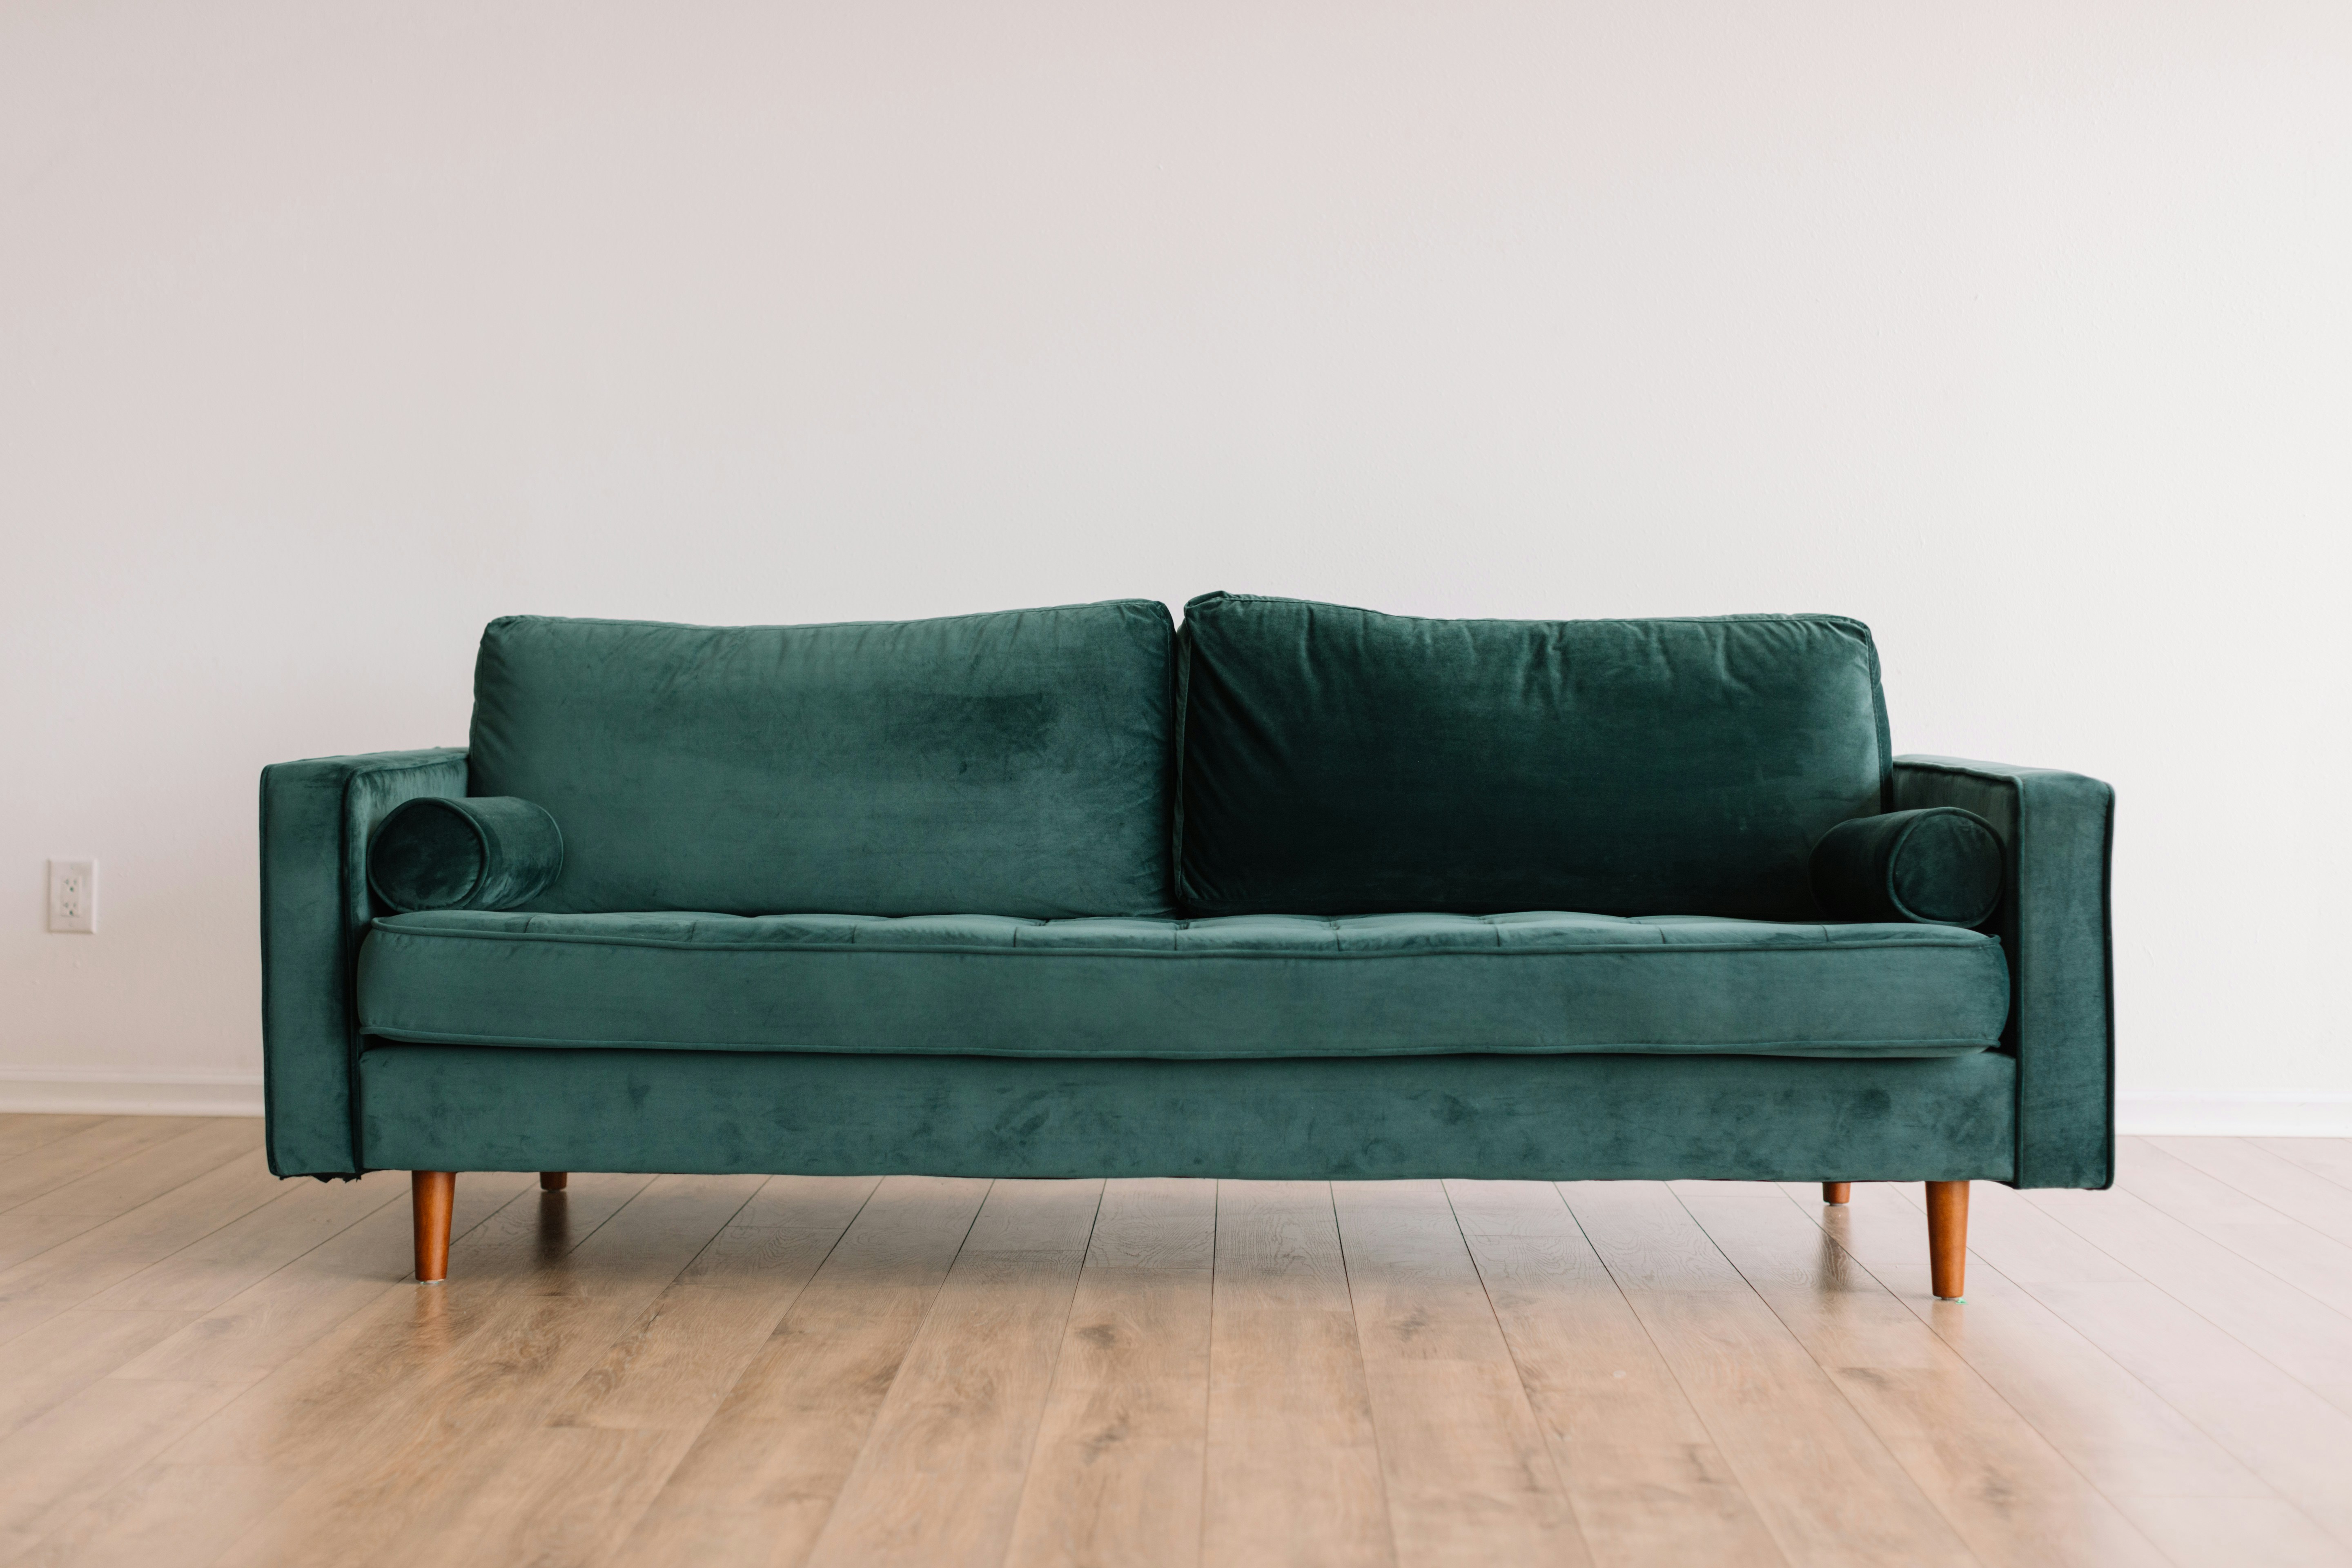 Cool hipster green couch sofa with brown wooden legs on wooden floor